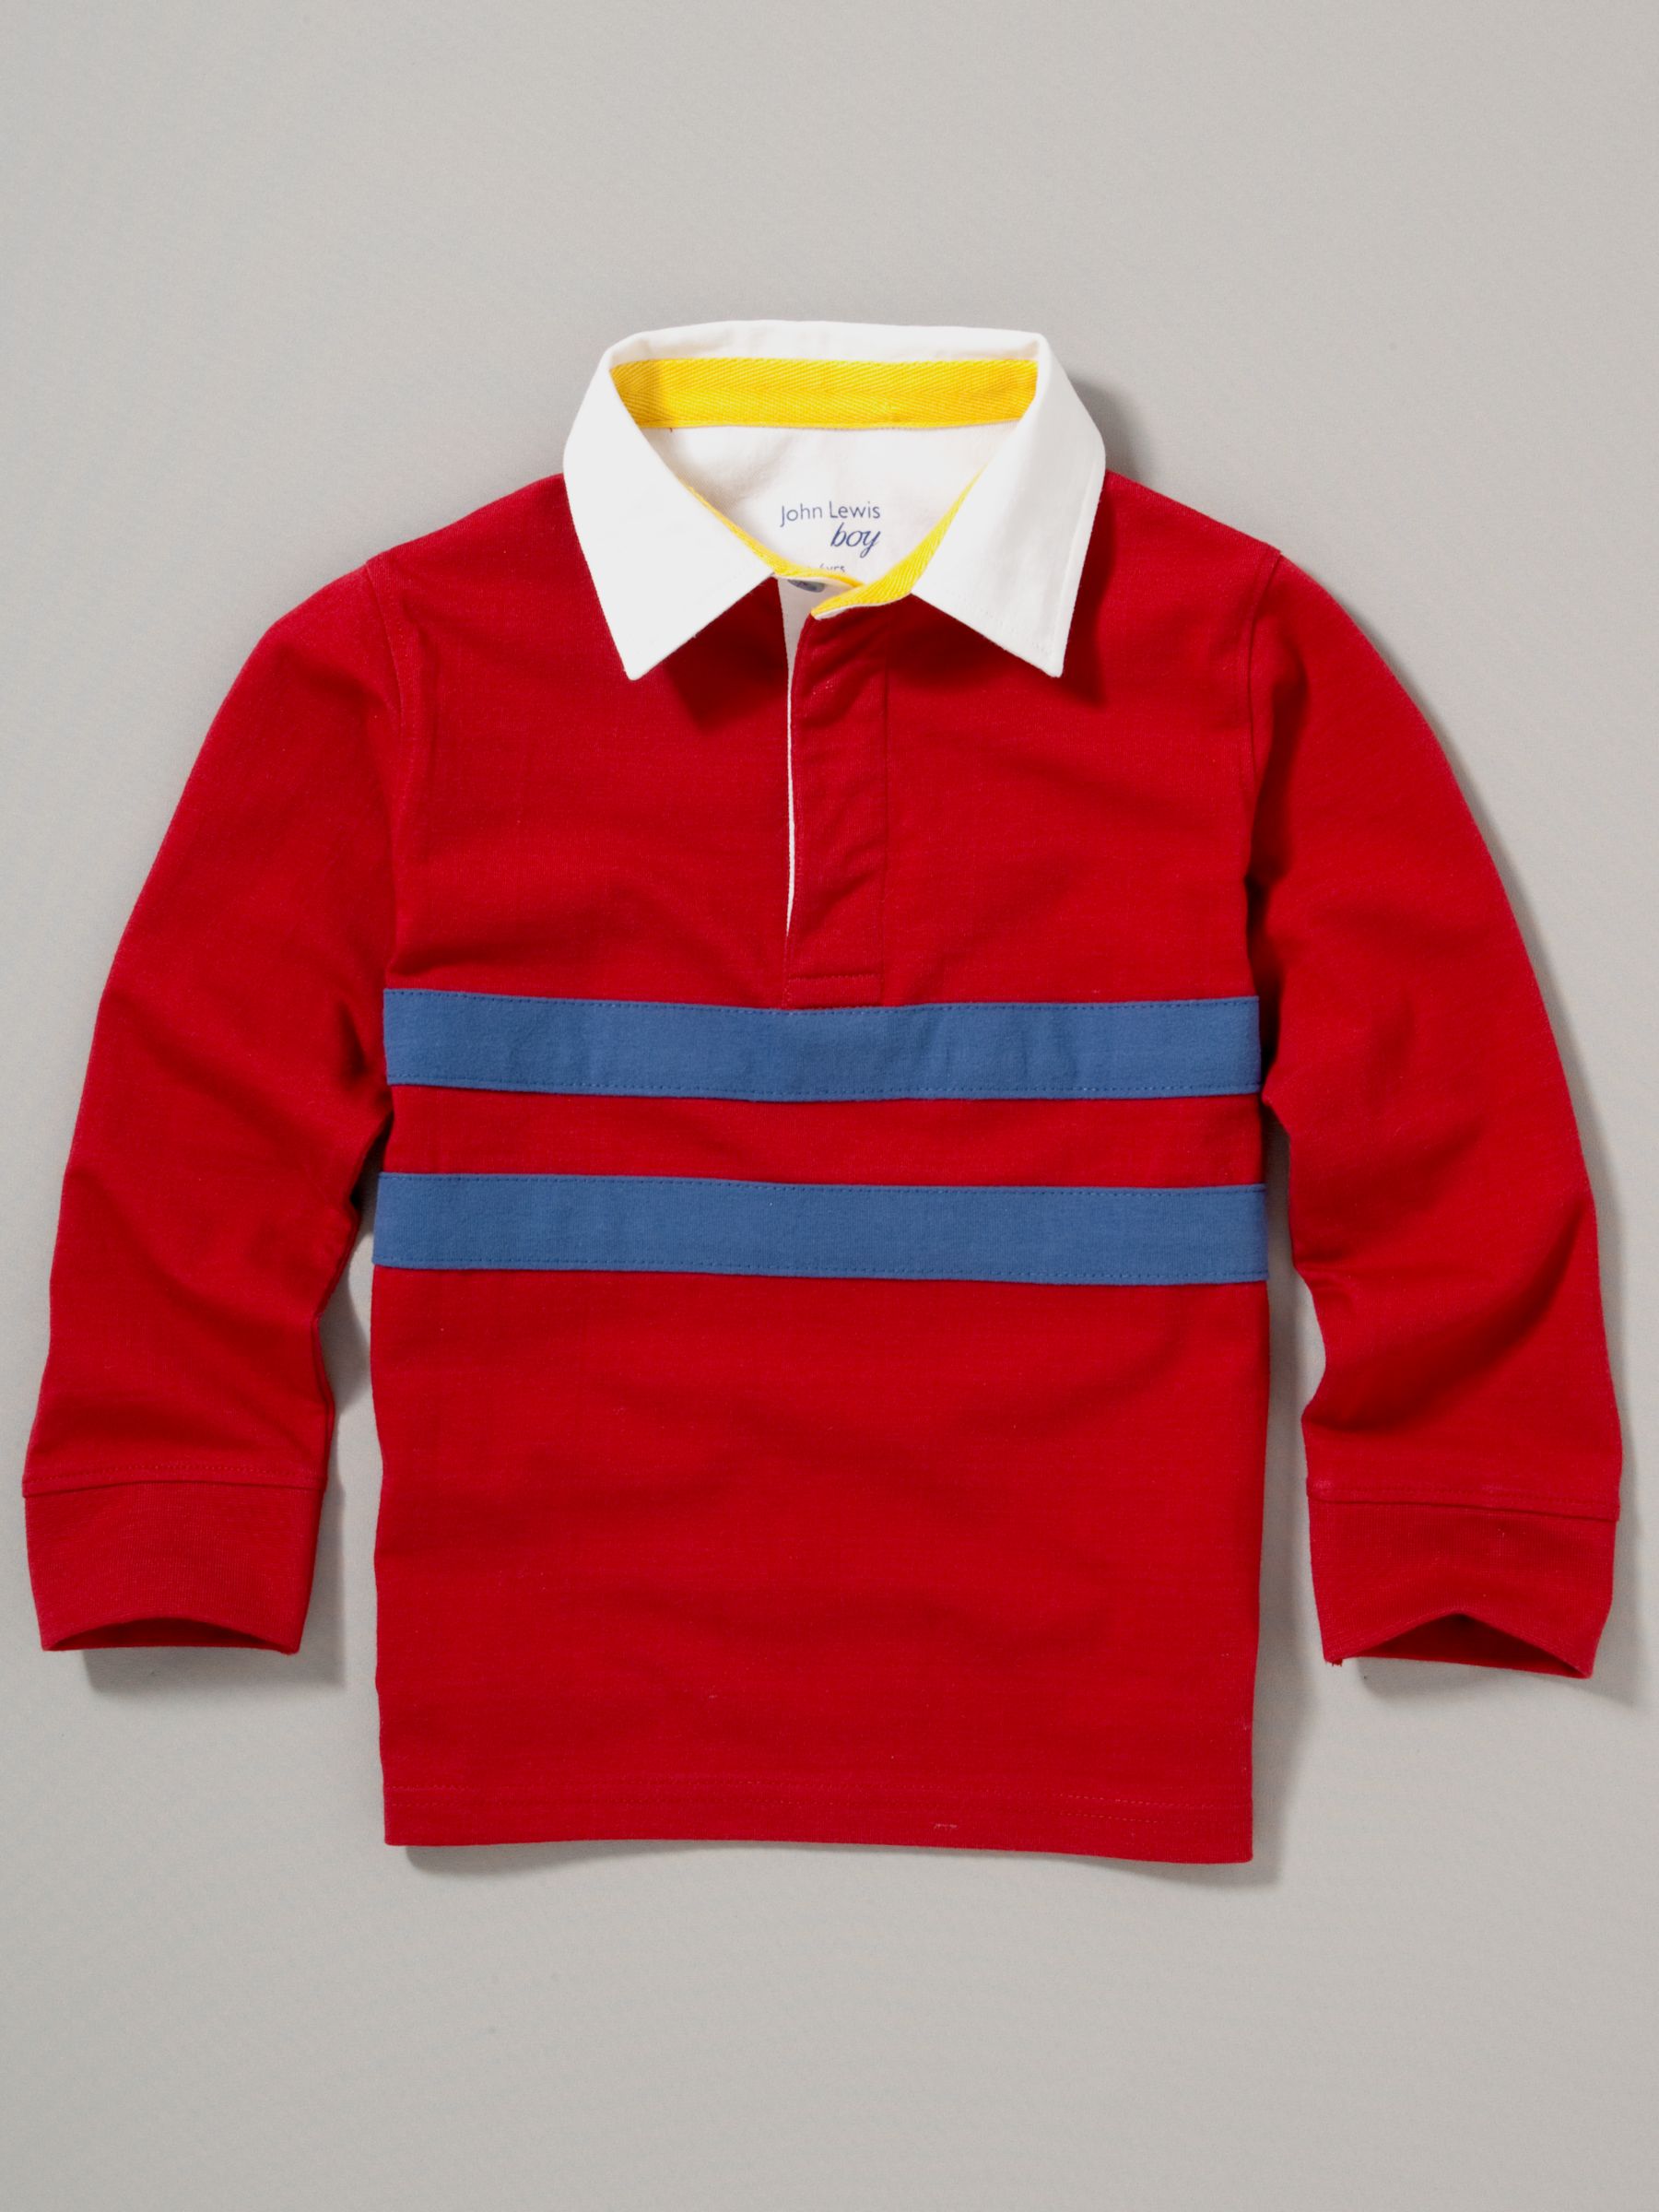 John Lewis Boy Long Sleeve Rugby Shirt with